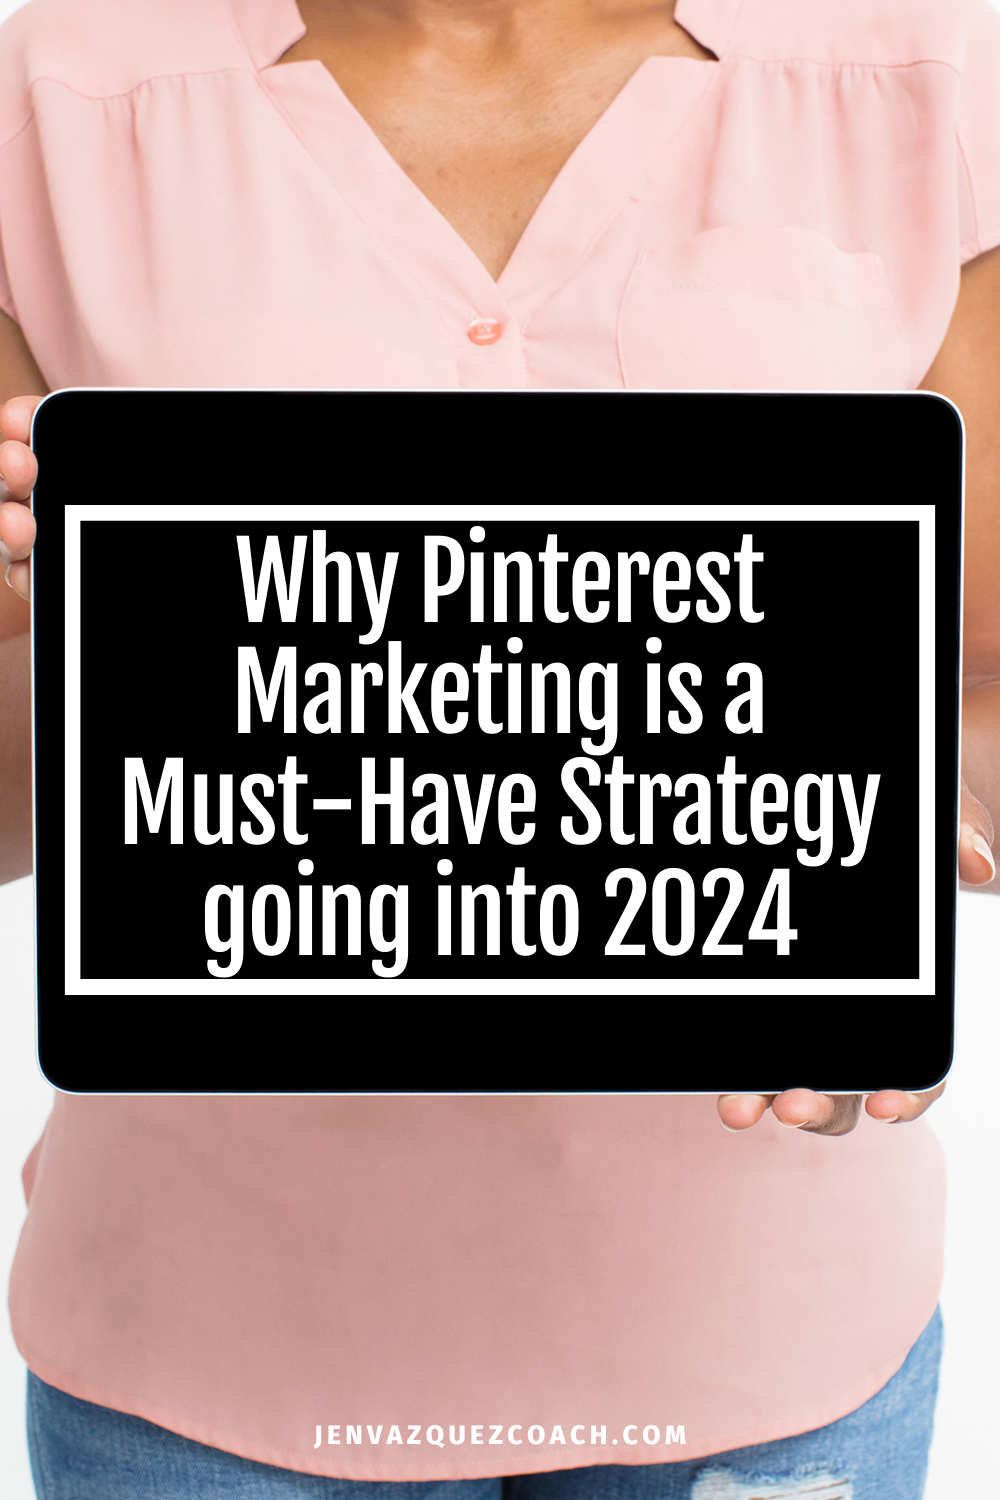 Why Pinterest Marketing is a Must-Have Strategy for Small Businesses going into 2024